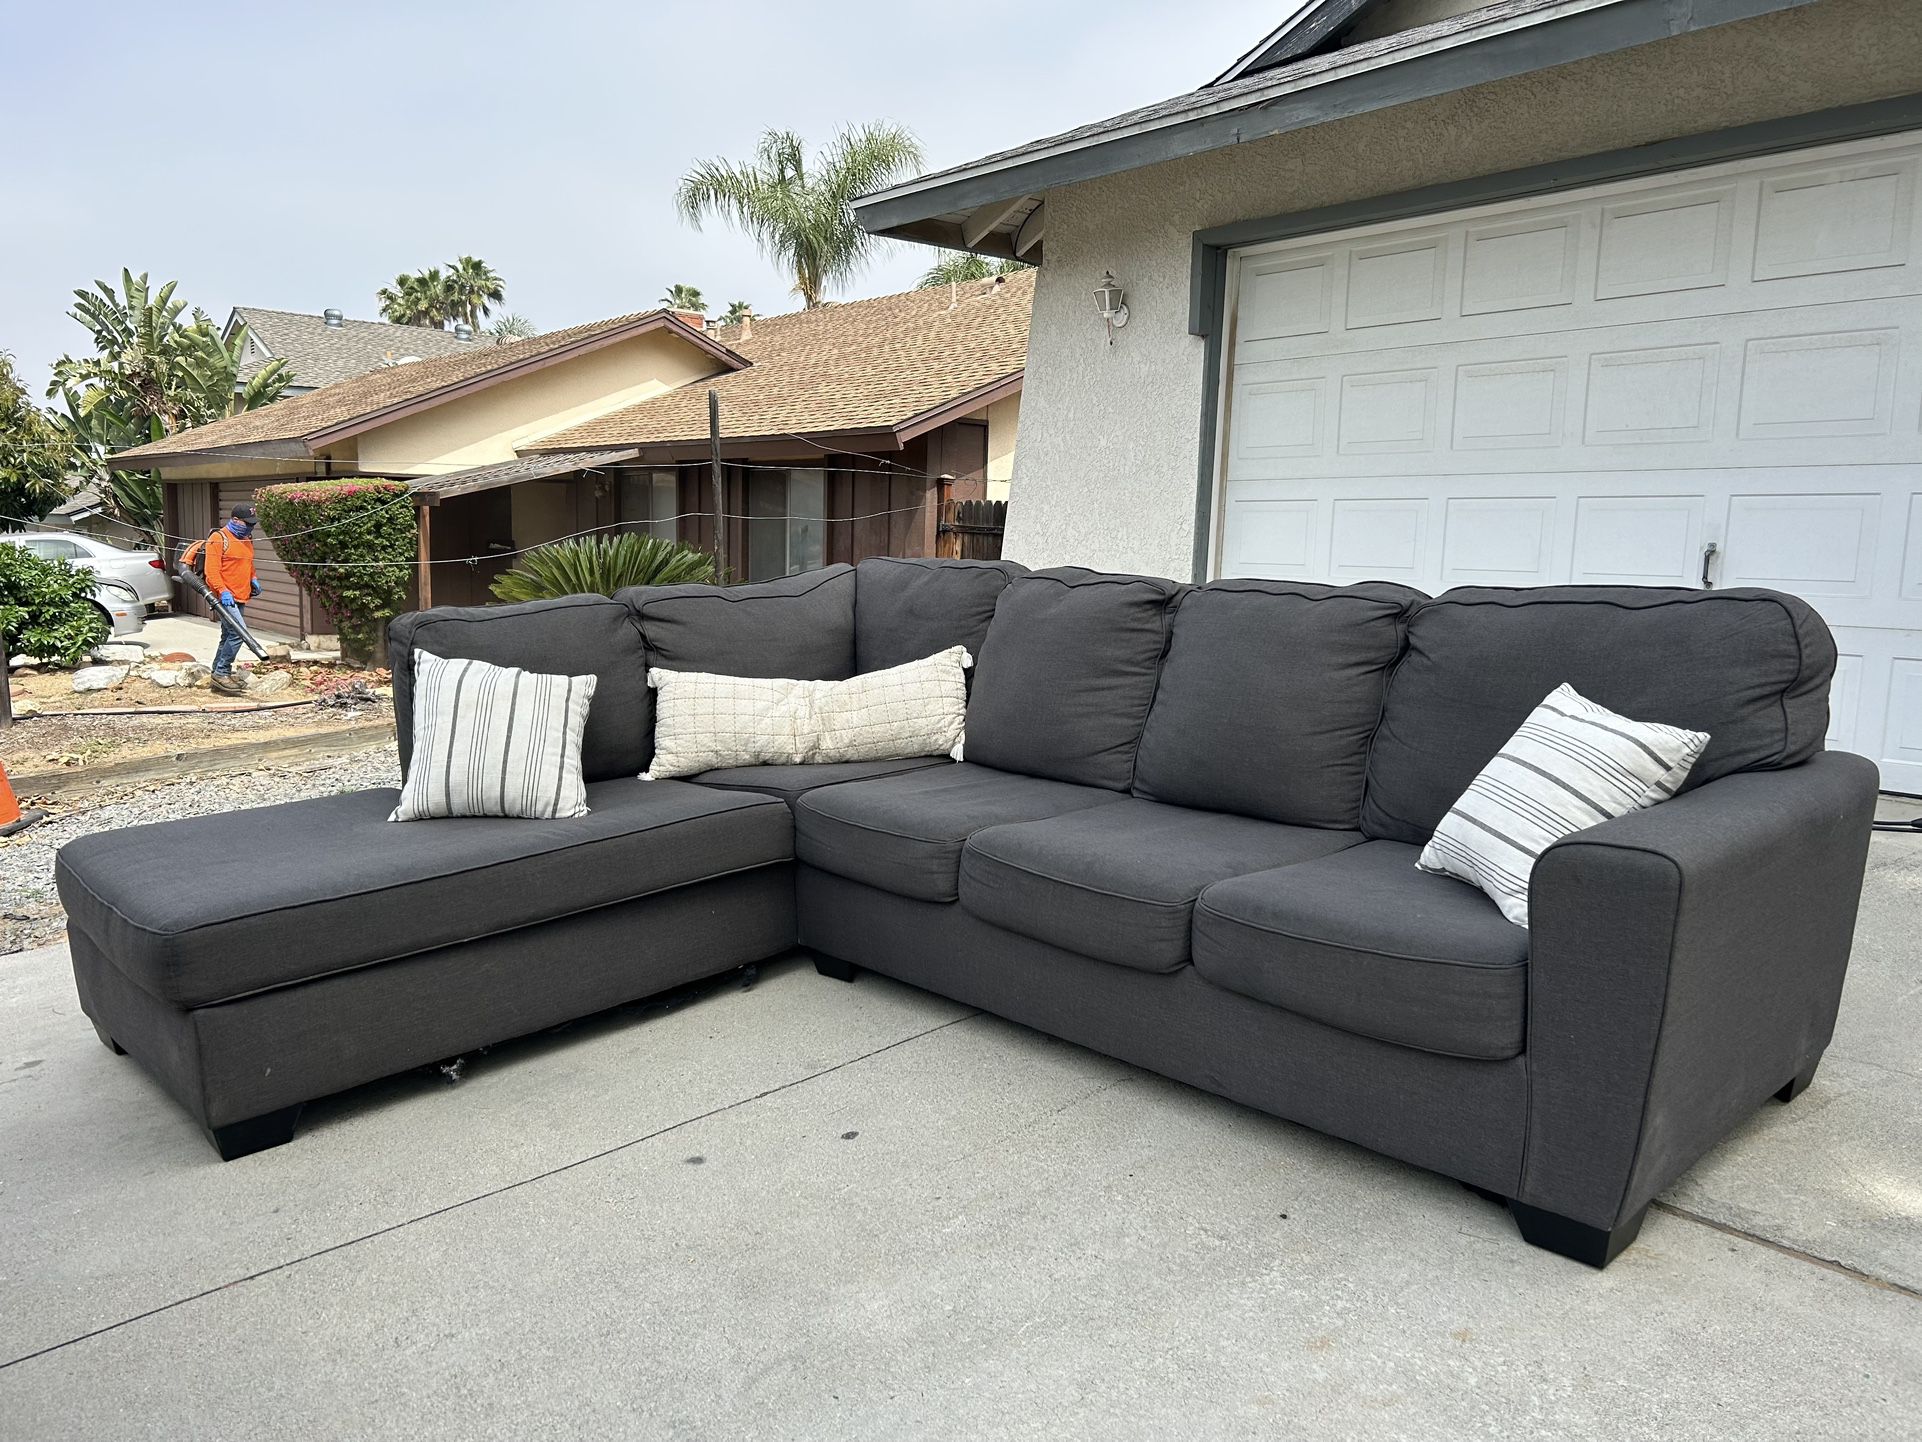 GREY SECTIONAL COUCH!!! 🚚 FREE DELIVERY!!! 🚚 